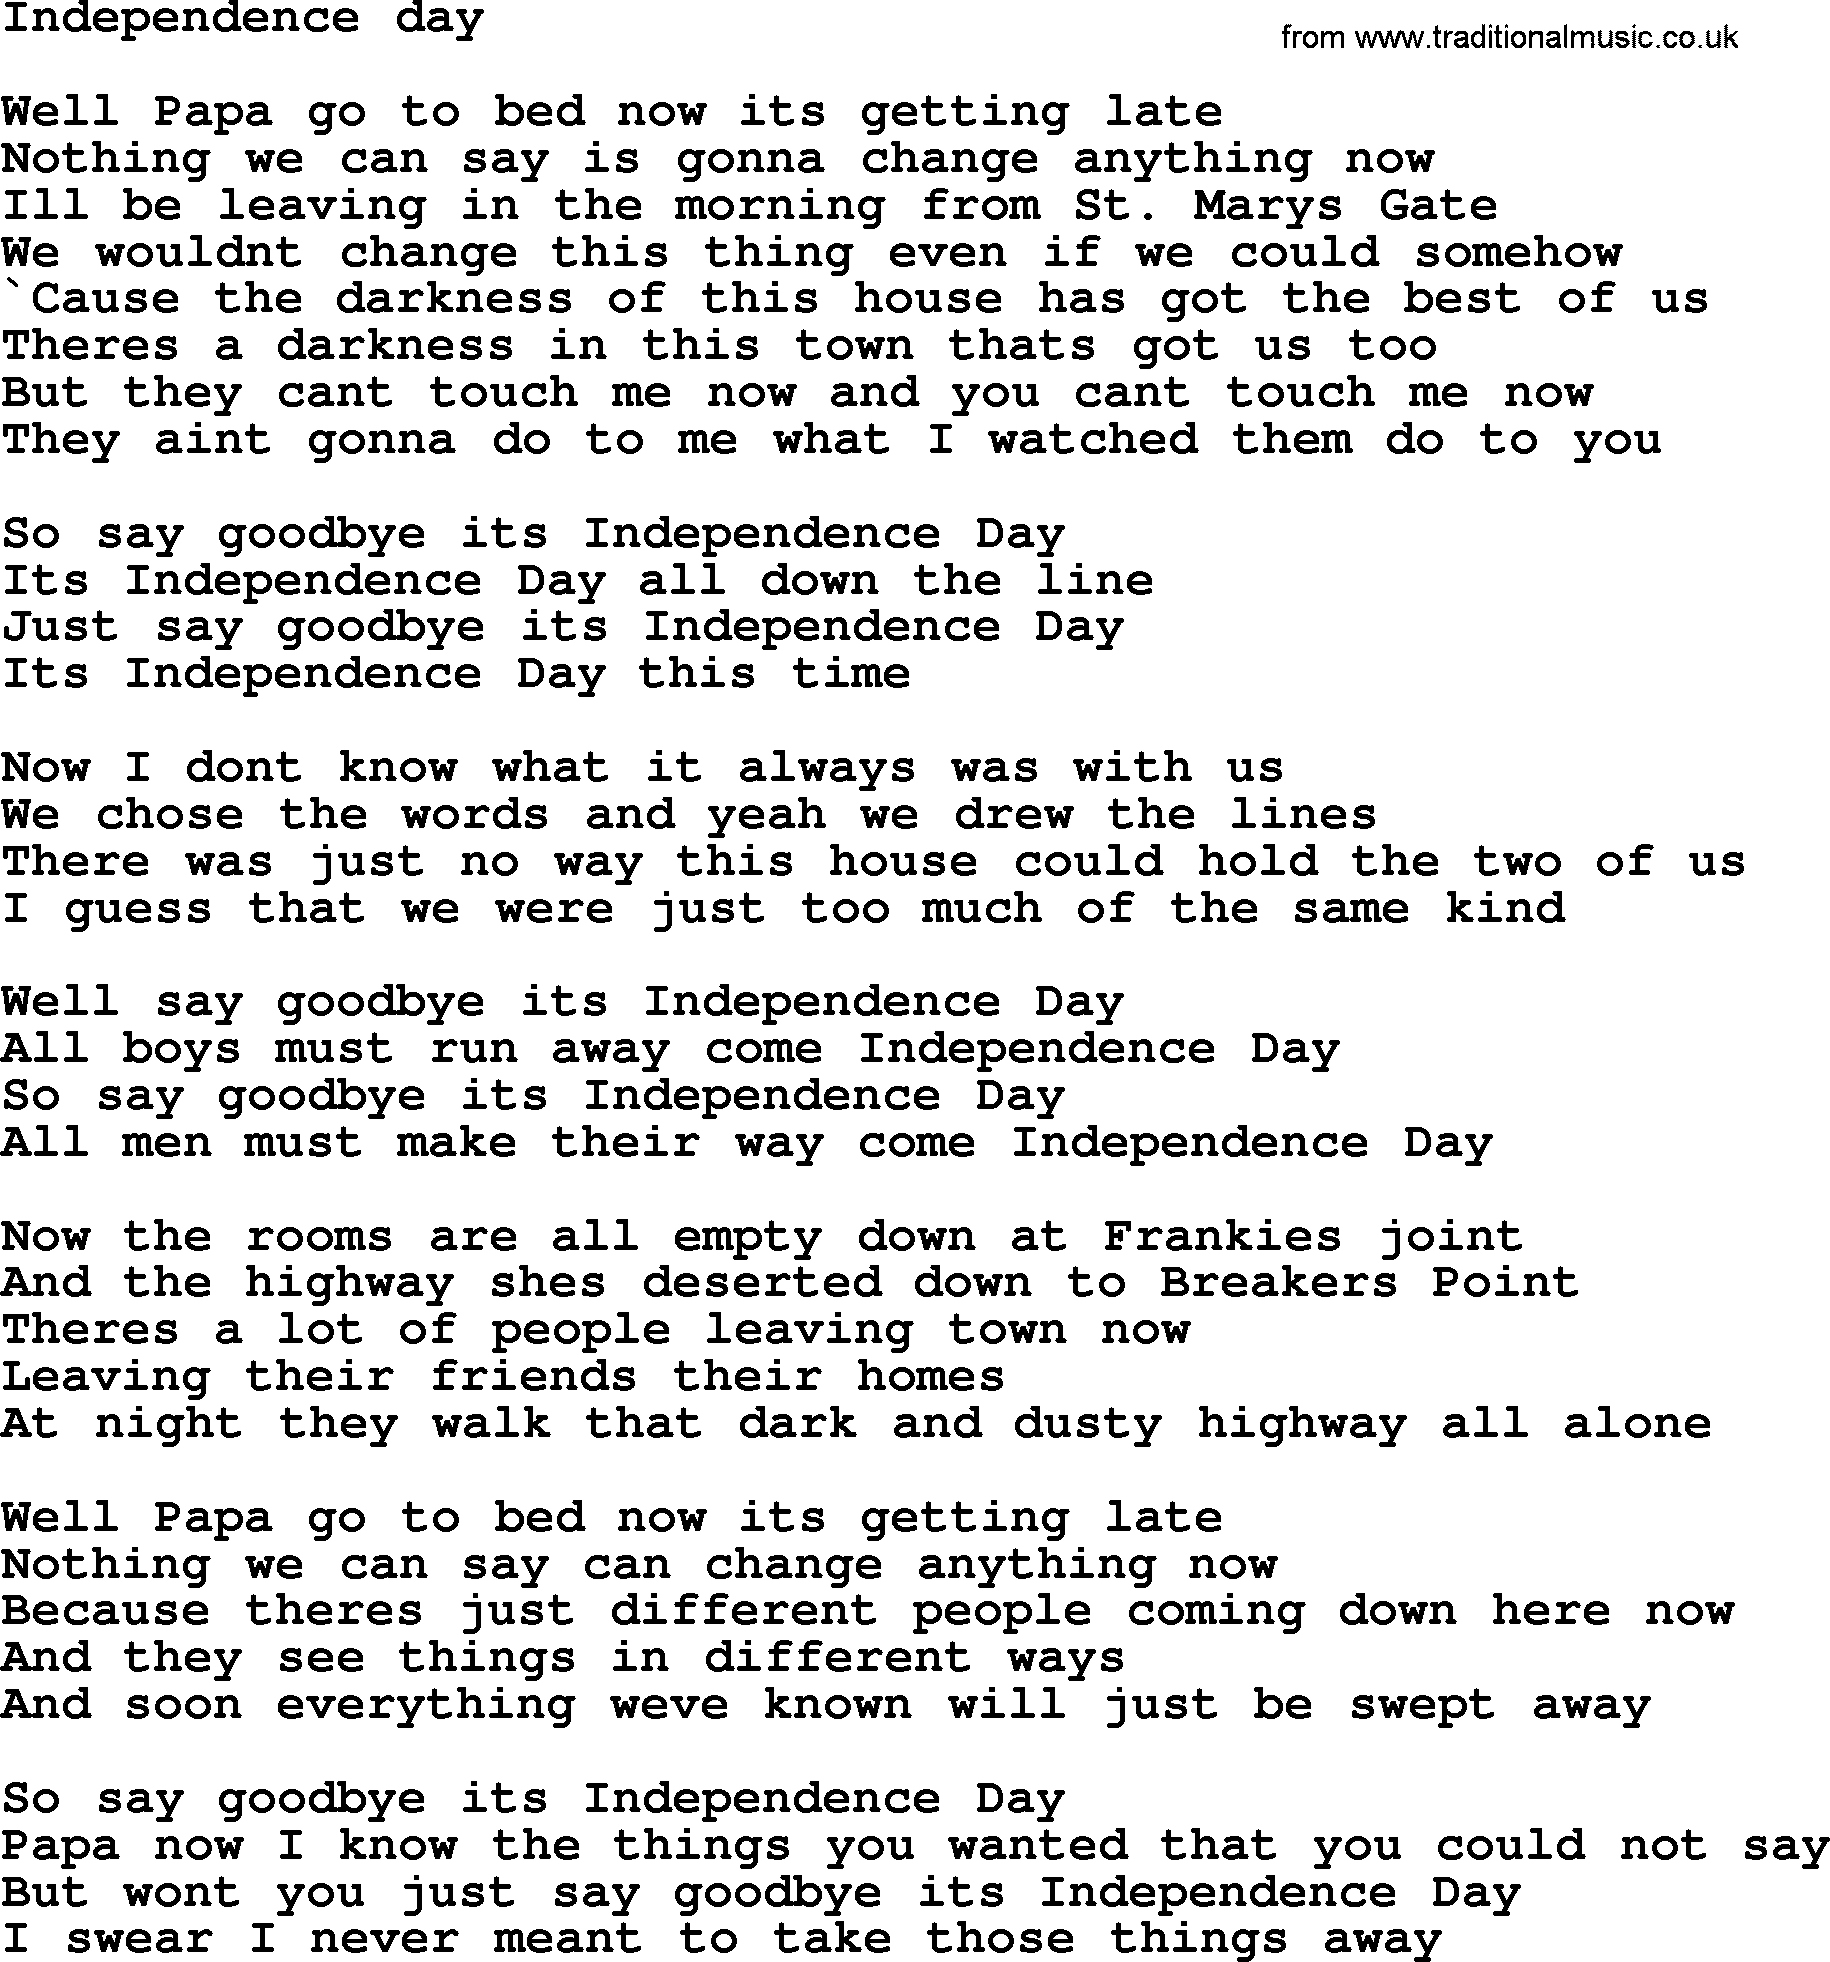 Bruce Springsteen song: Independence Day lyrics